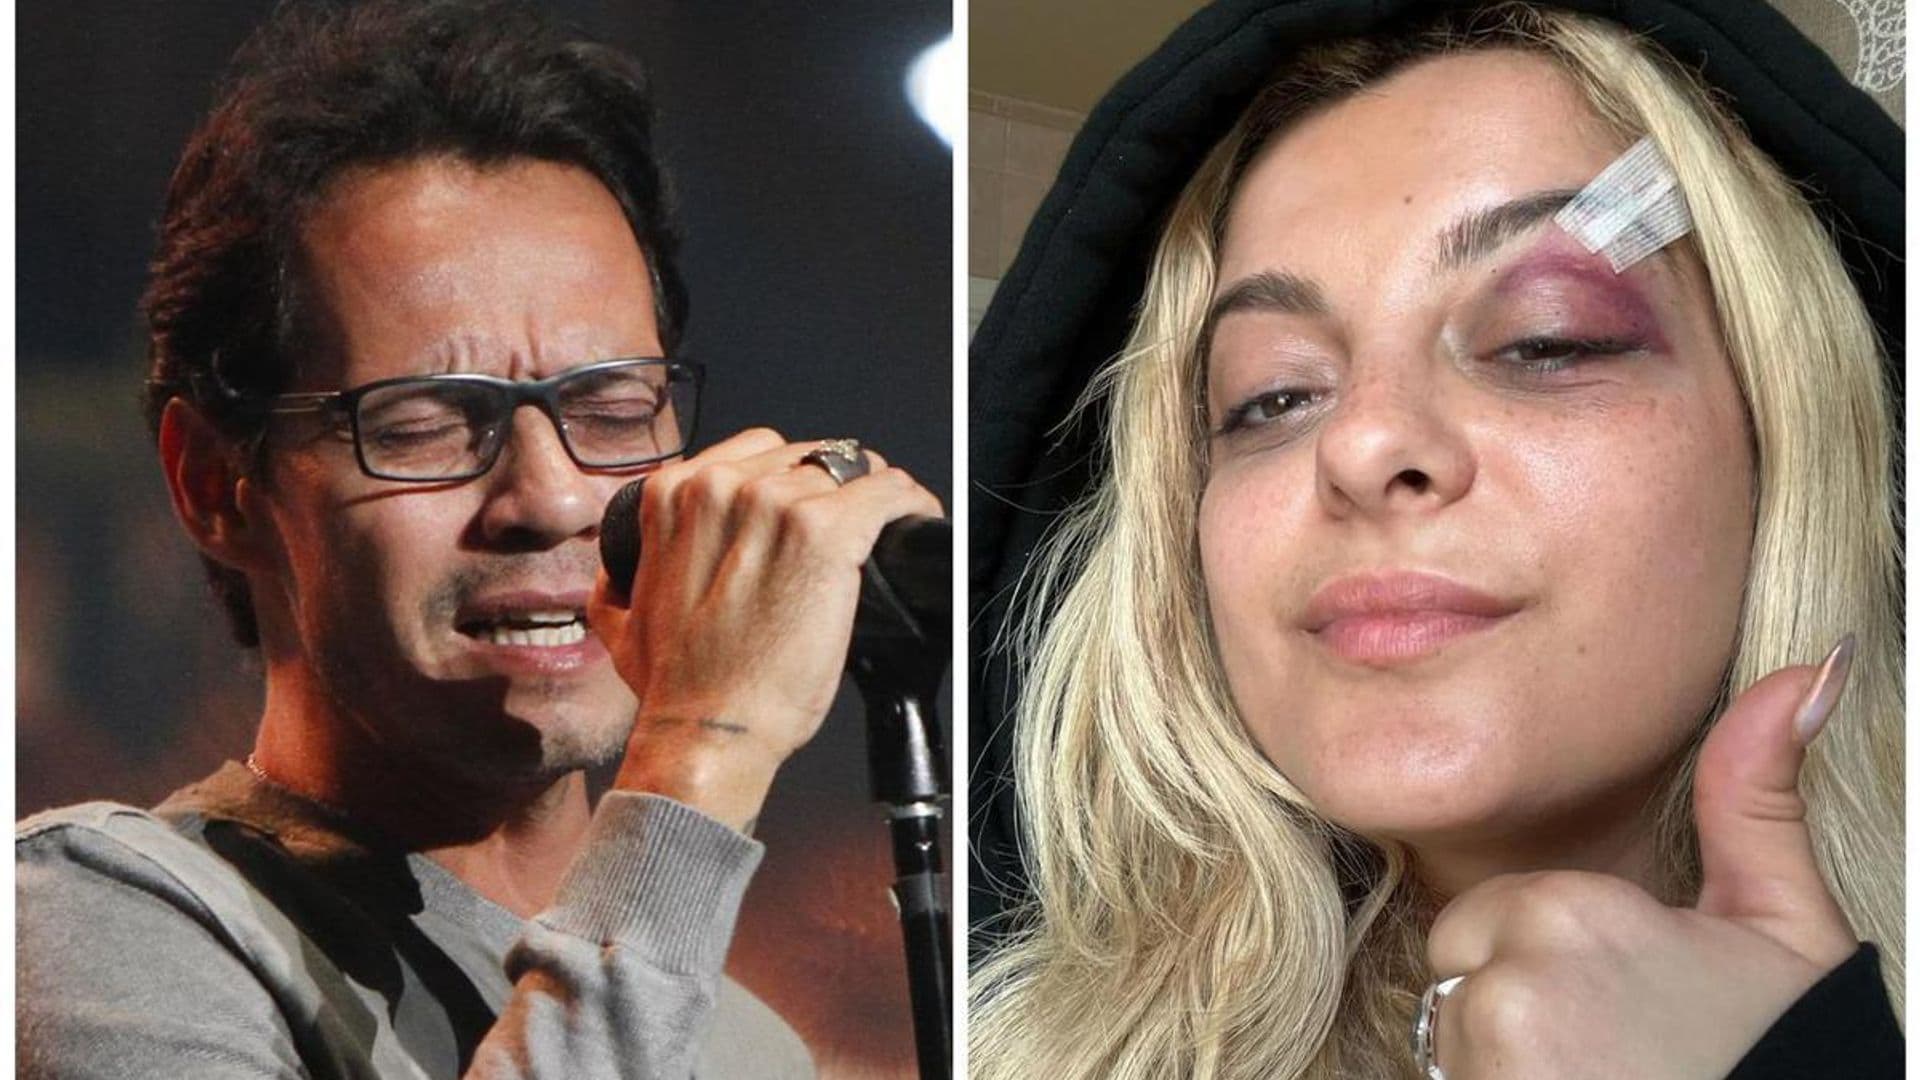 From Marc Anthony to Bebe Rexha: The stars who have got injured by fans throwing them items